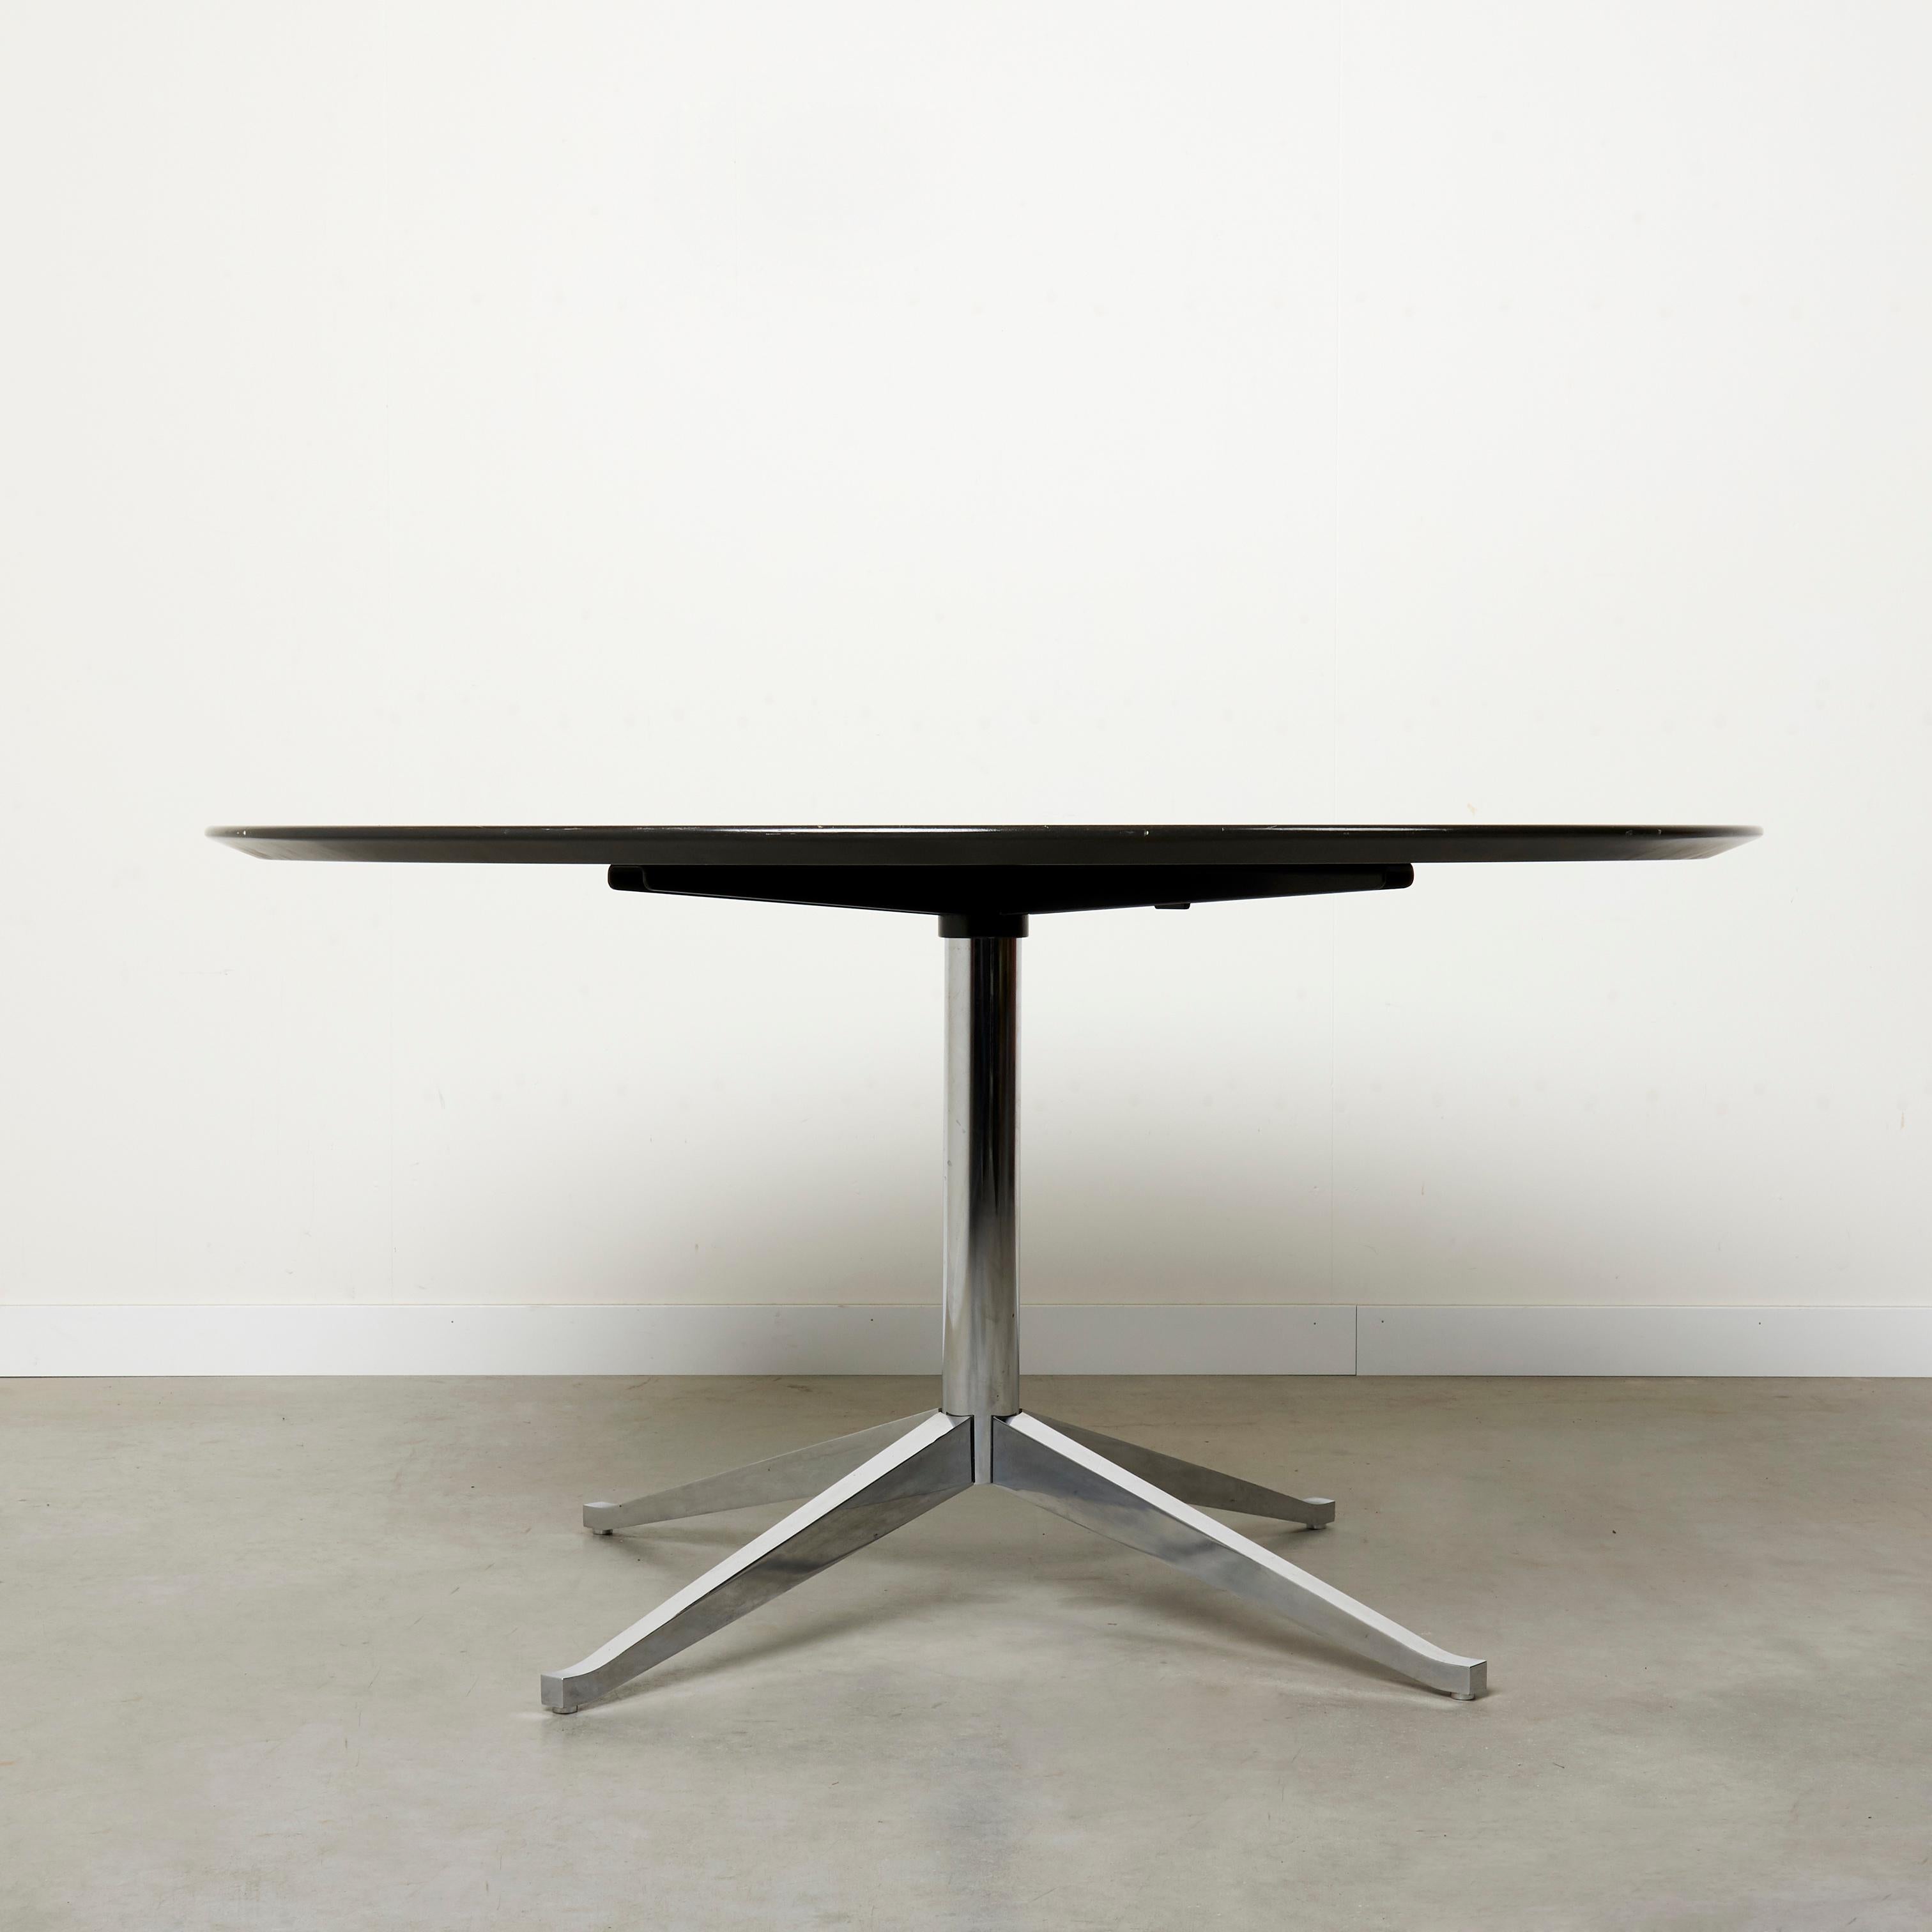 Vintage dining table by Florence Knoll for Knoll International / Studio, 1960s design.
Round dark oak table top with steel base.
Table is in a good vintage conditions with signs of use revealing its age (see pictures).